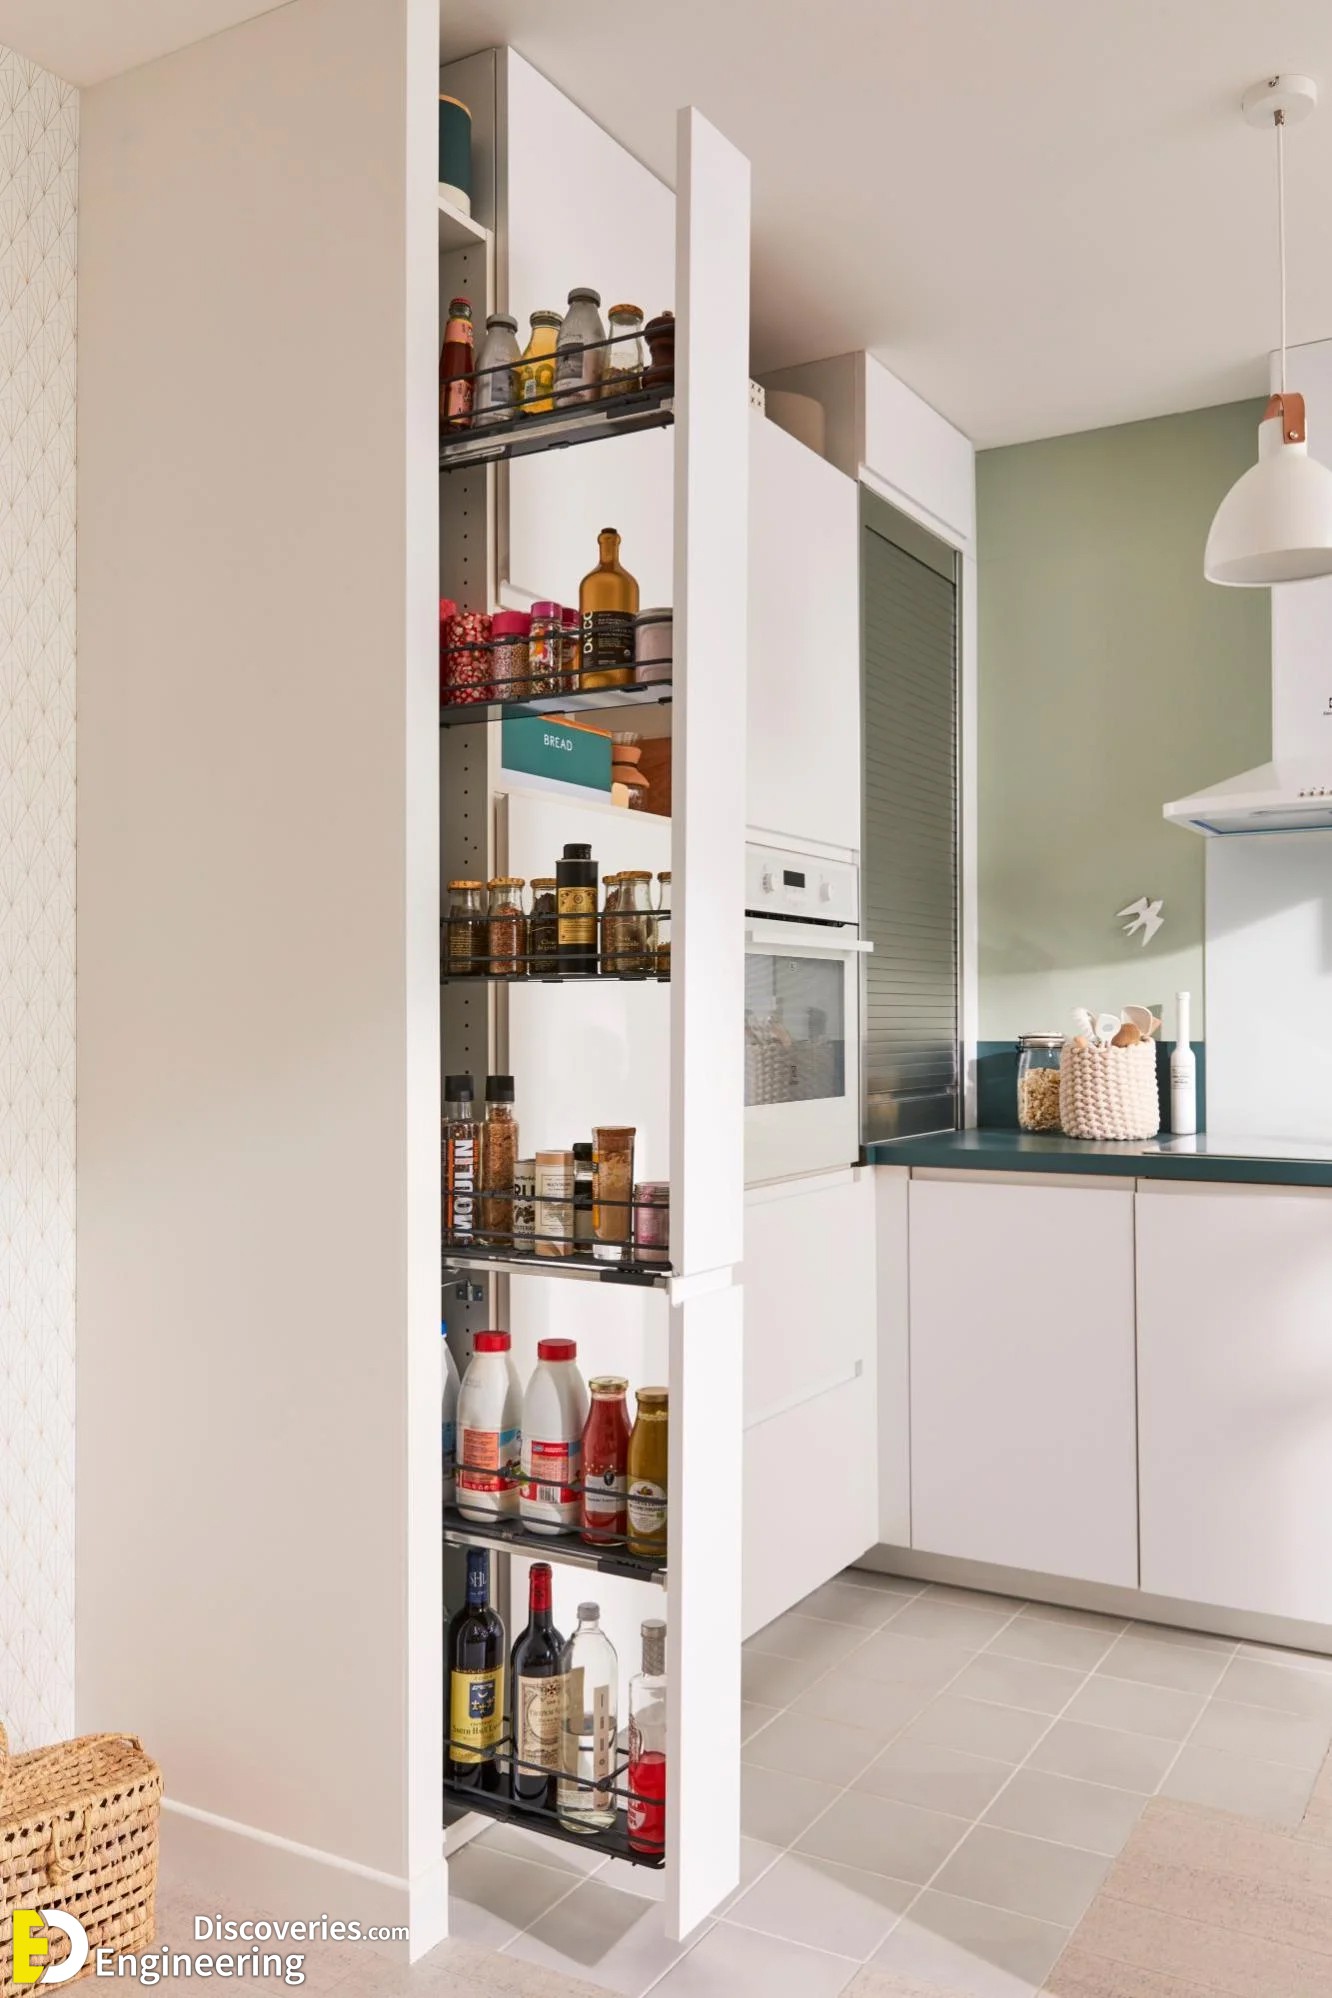 https://engineeringdiscoveries.com/7-engineering-discoveries-maximize-your-space-brilliant-kitchen-organization-ideas-for-effortless-cabinet-storage/